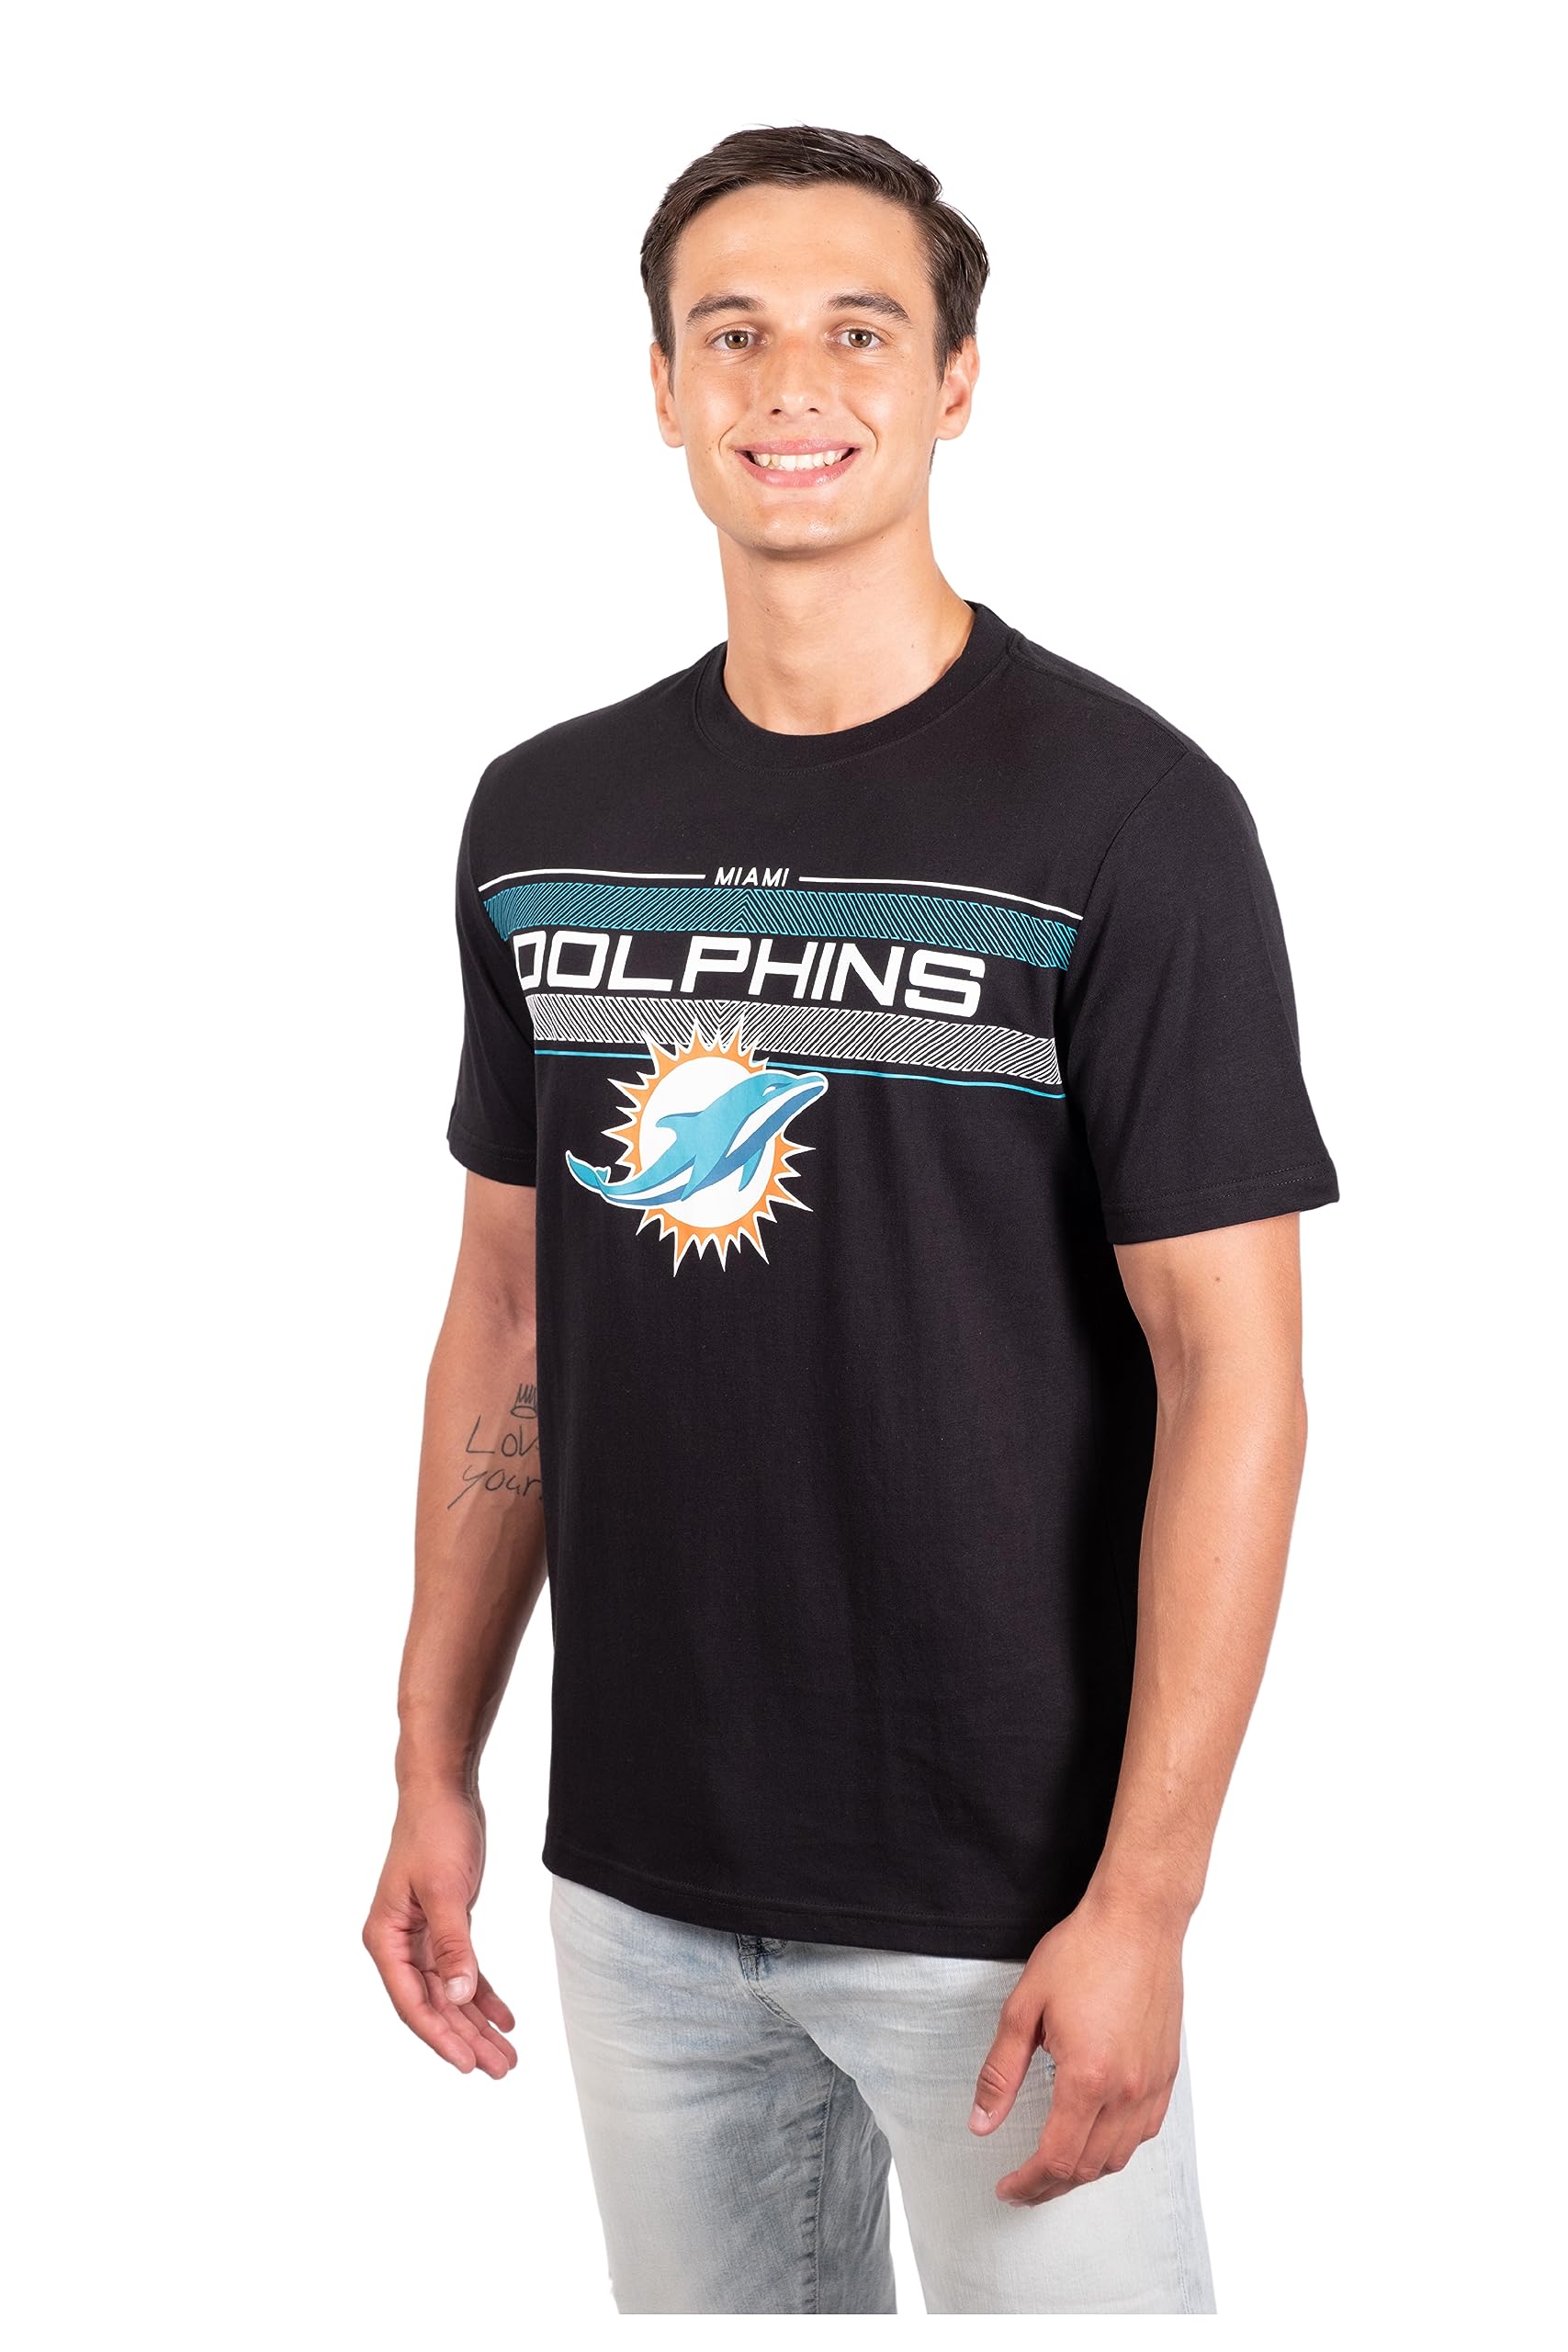 Ultra Game NFL Miami Dolphins Mens Super Soft Ultimate Game Day Crew Neck T-Shirt|Miami Dolphins